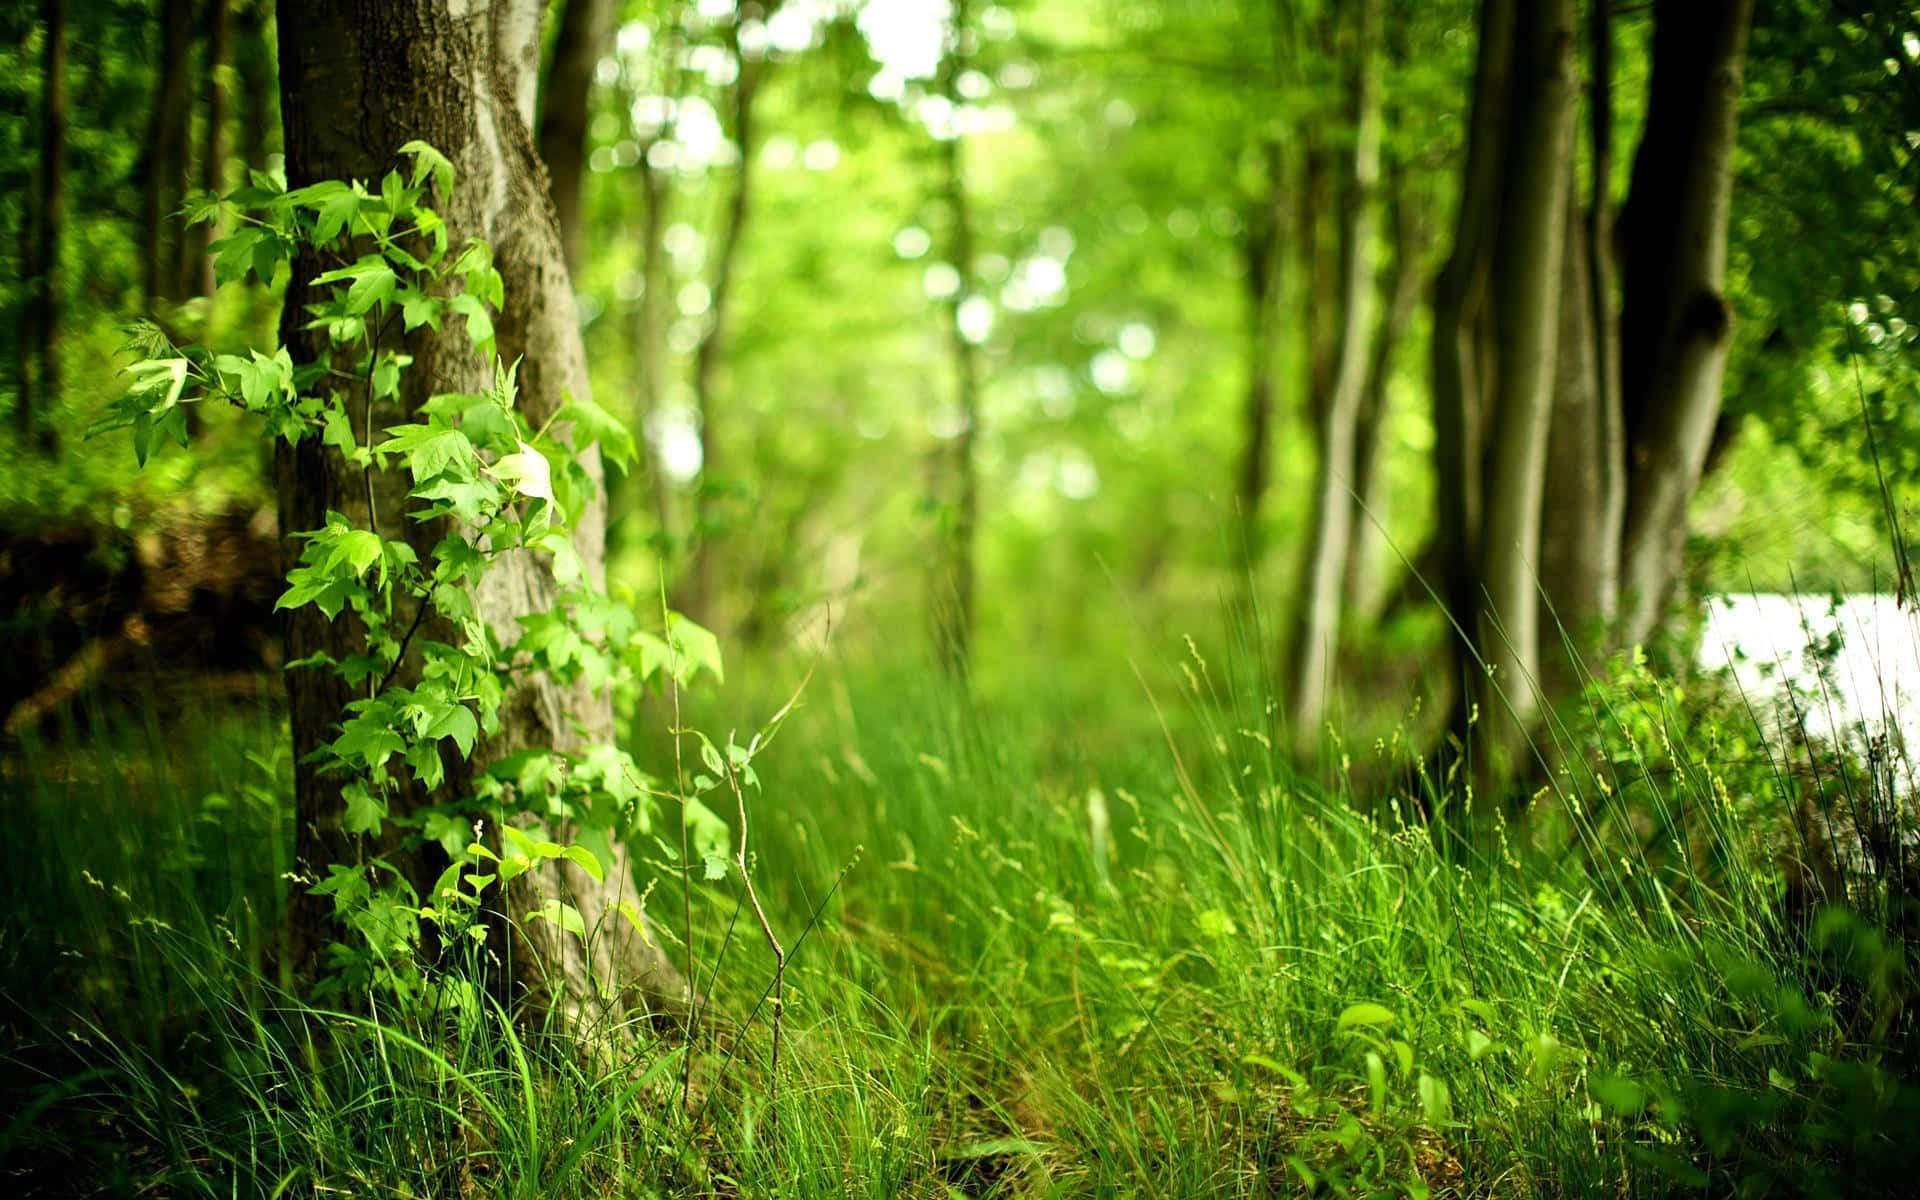 A Lush Forest Of Green, Perfect For Peaceful Walks And Nature Observation